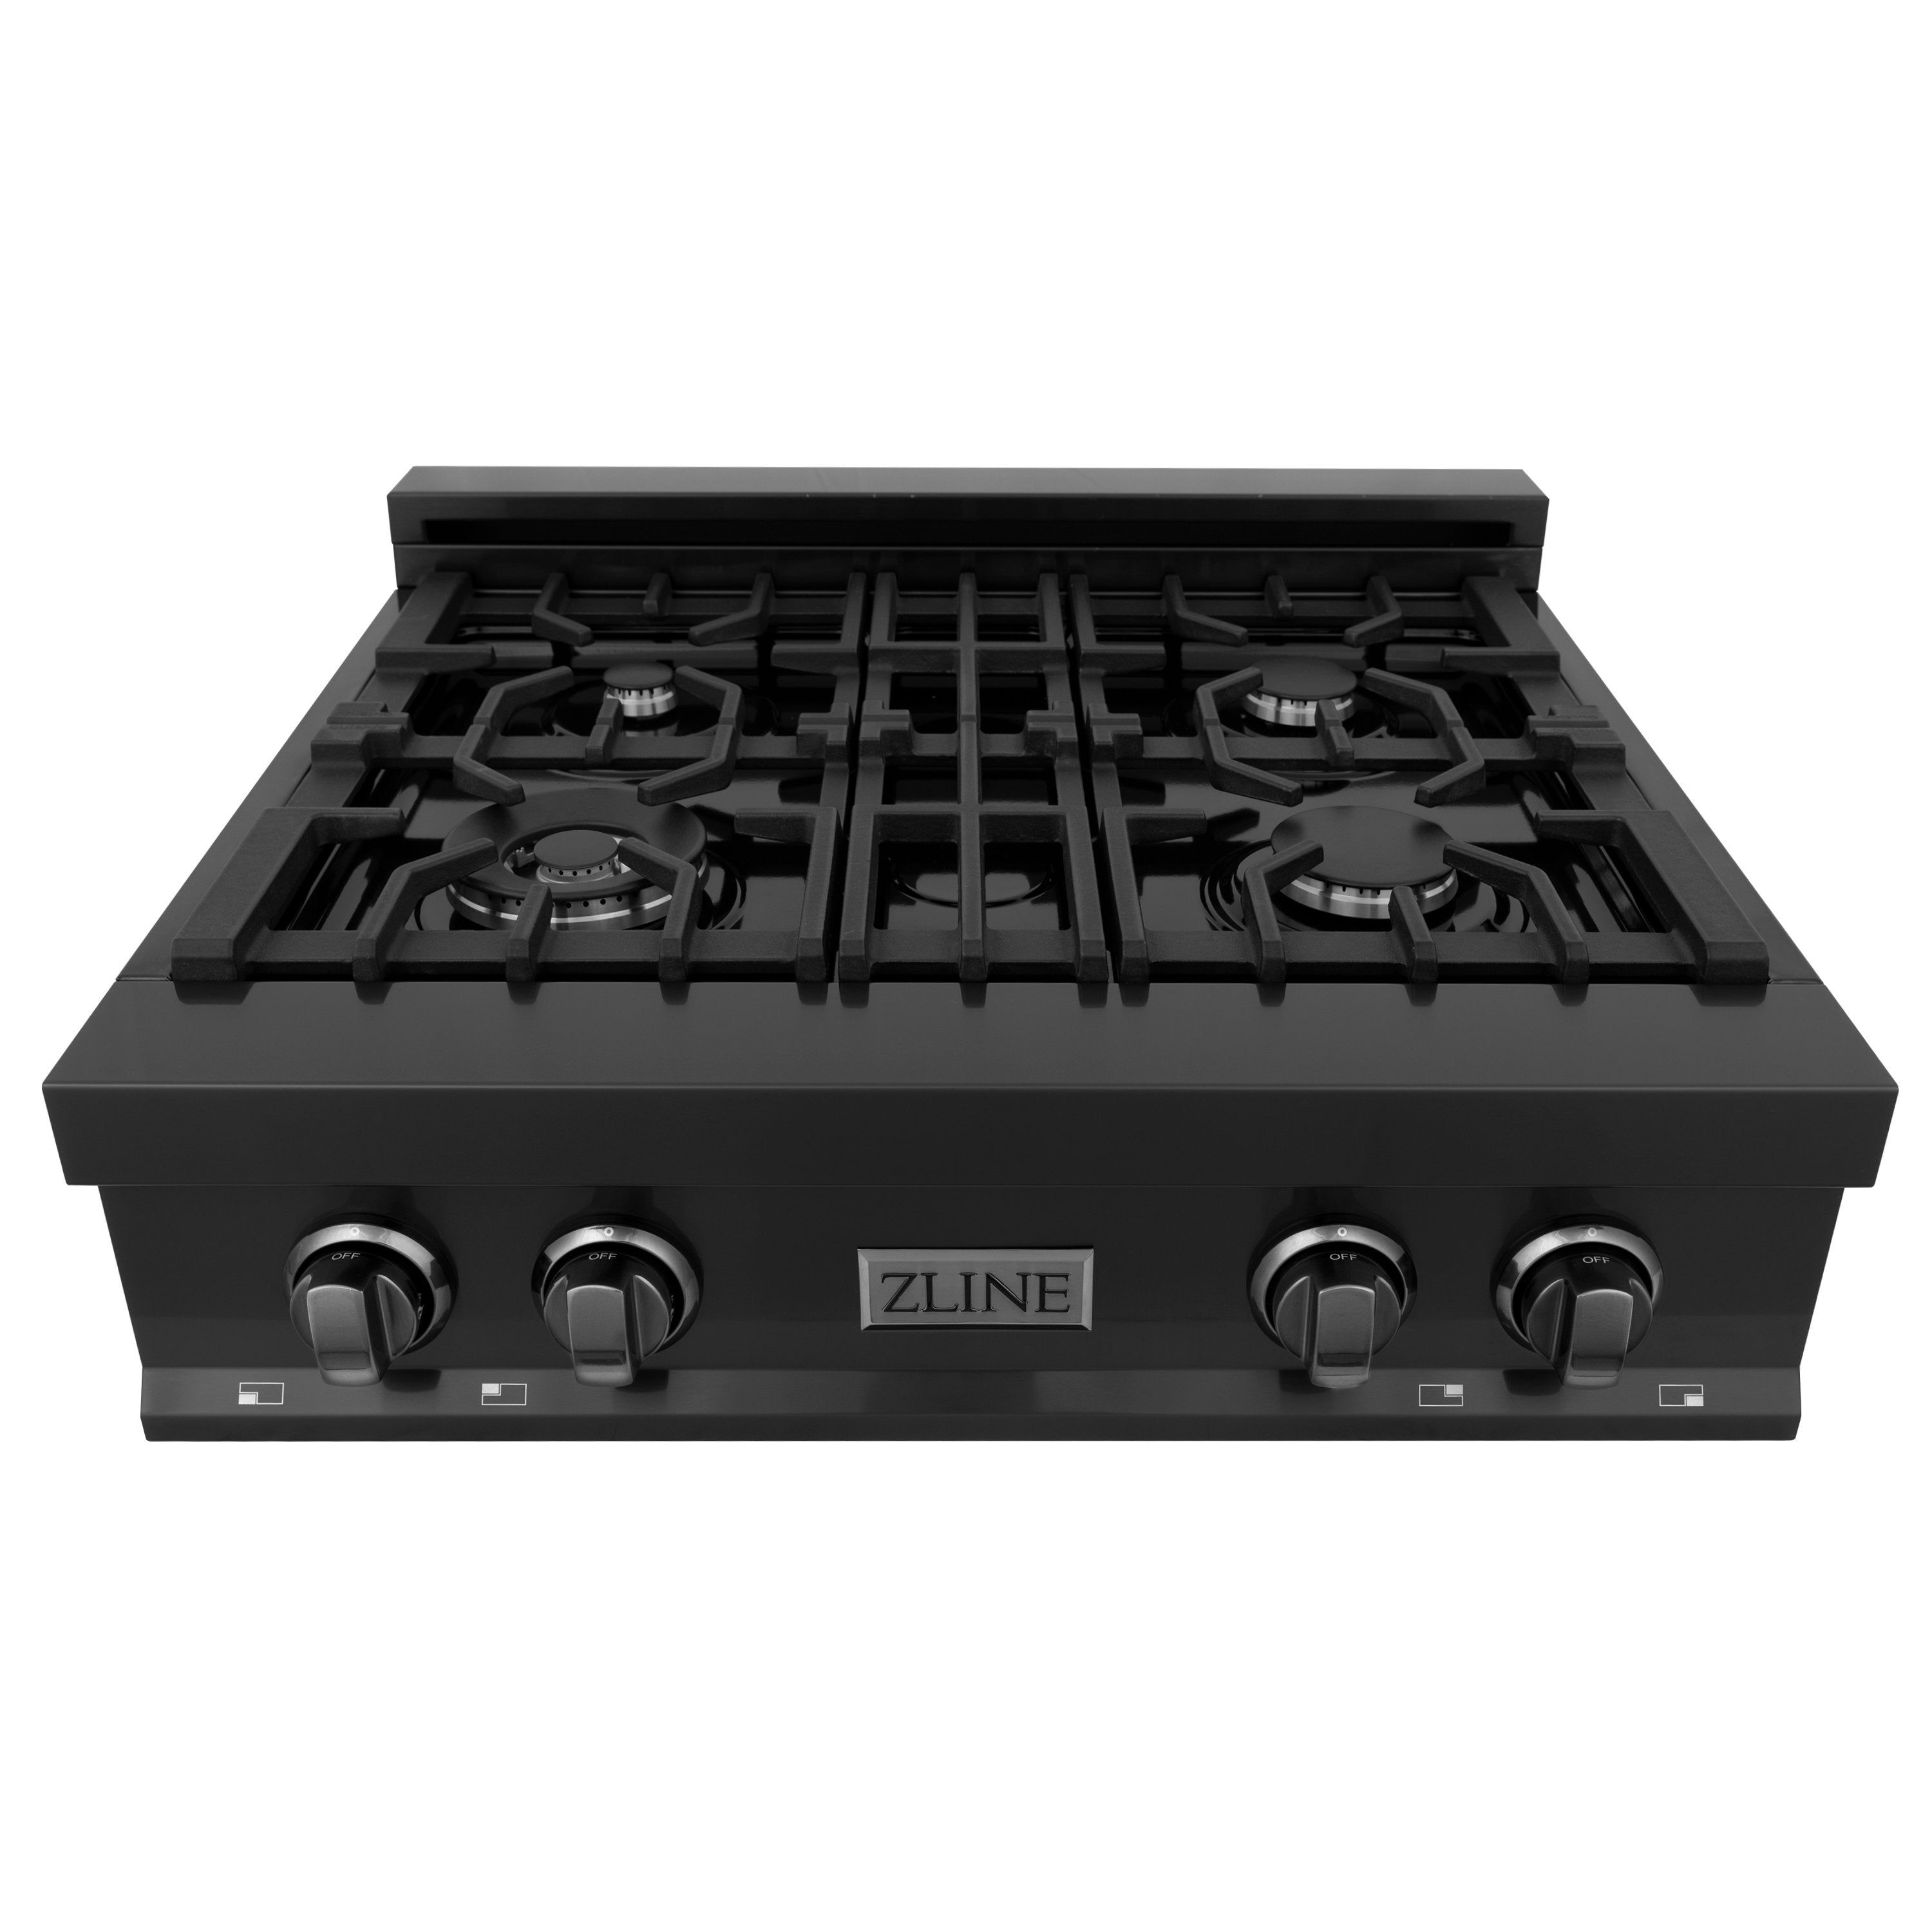 Therangehoodstore.com, ZLINE 30 in. Porcelain Rangetop in Black Stainless with 4 Gas Burners (RTB), RTB-30,